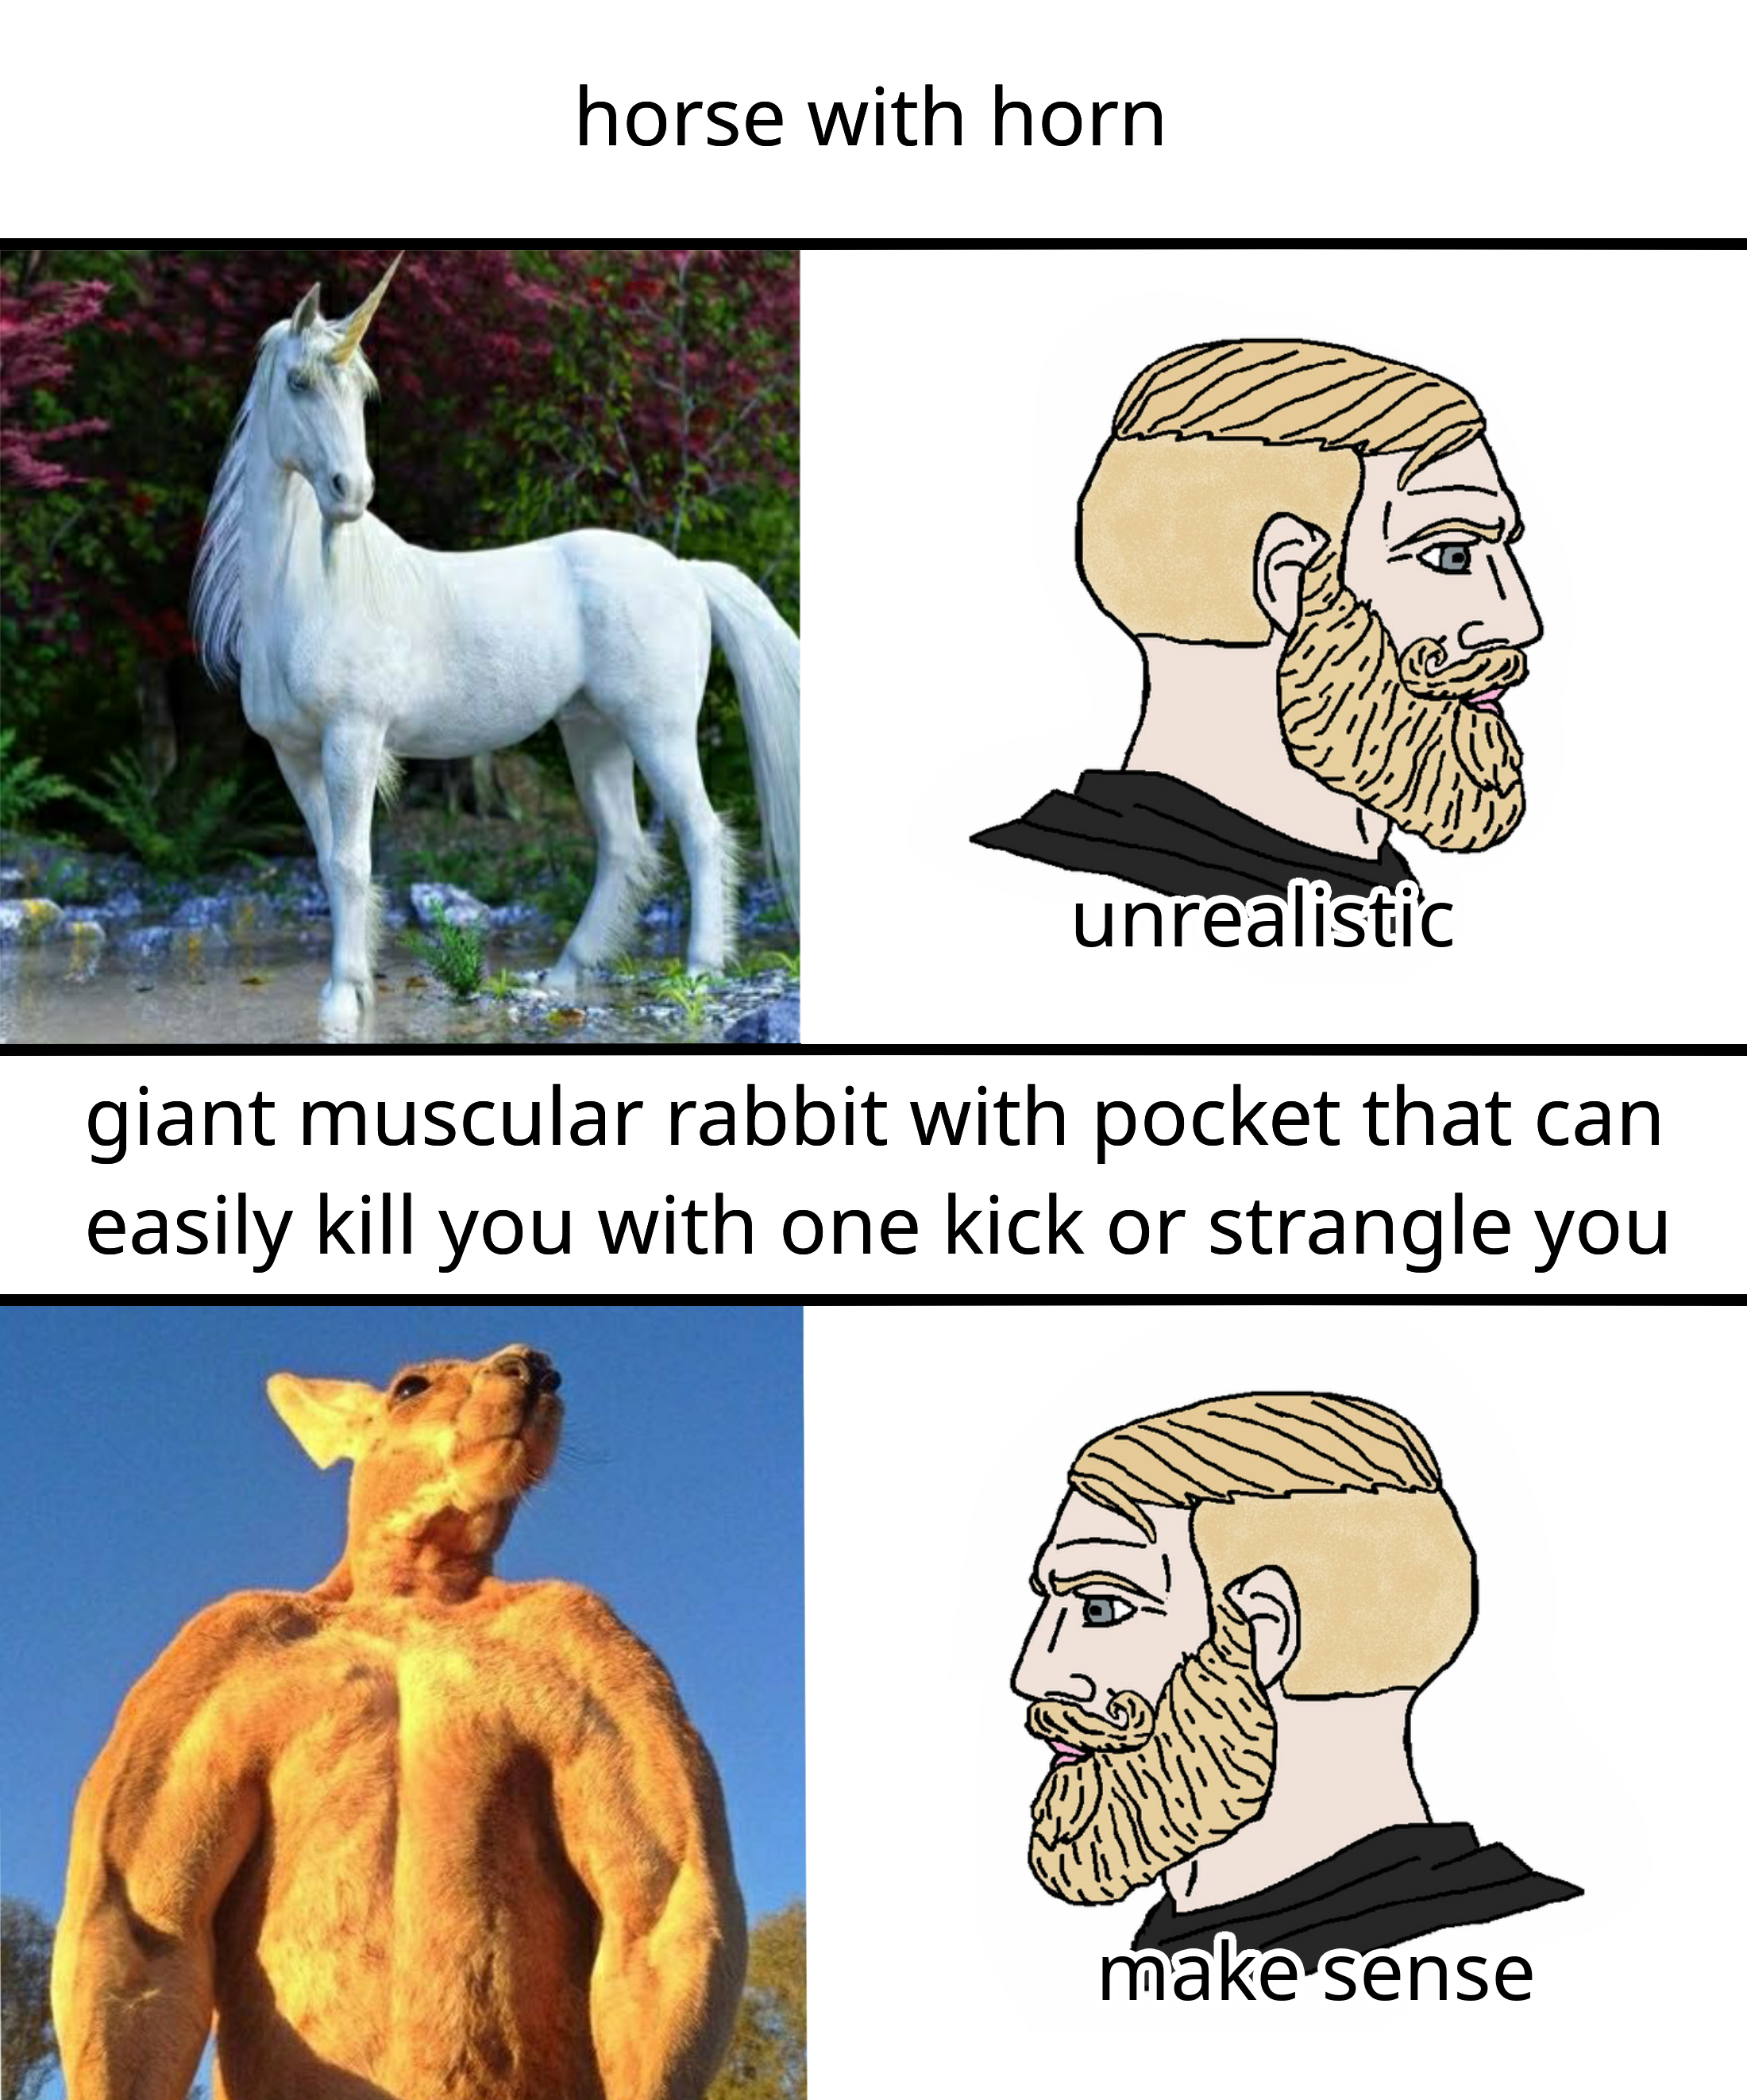 daily dose of memes - cafereisebar - horse with horn unrealistic giant muscular rabbit with pocket that can easily kill you with one kick or strangle you make sense